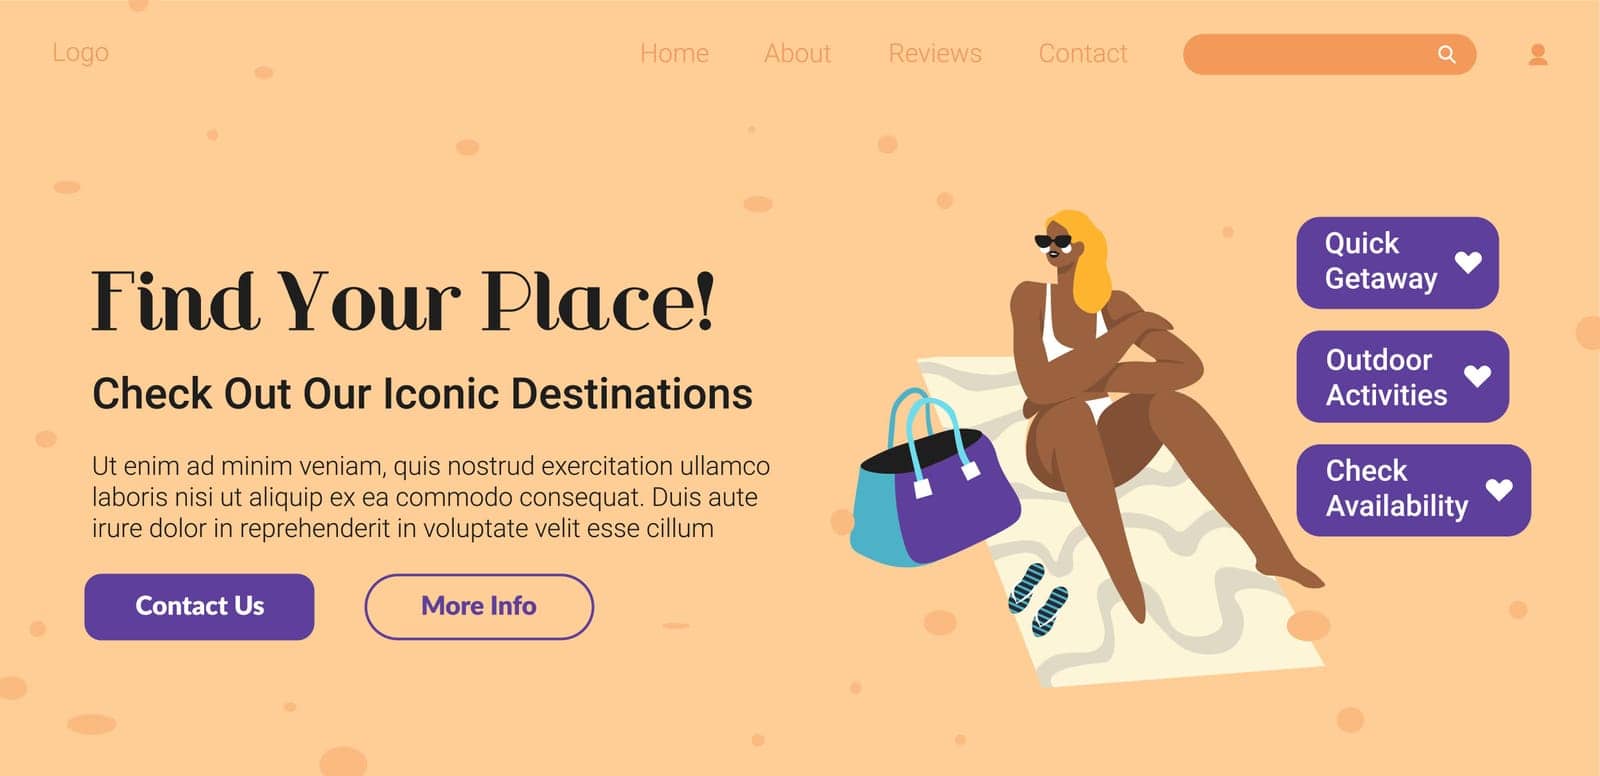 Find your place, check iconic destinations web by Sonulkaster